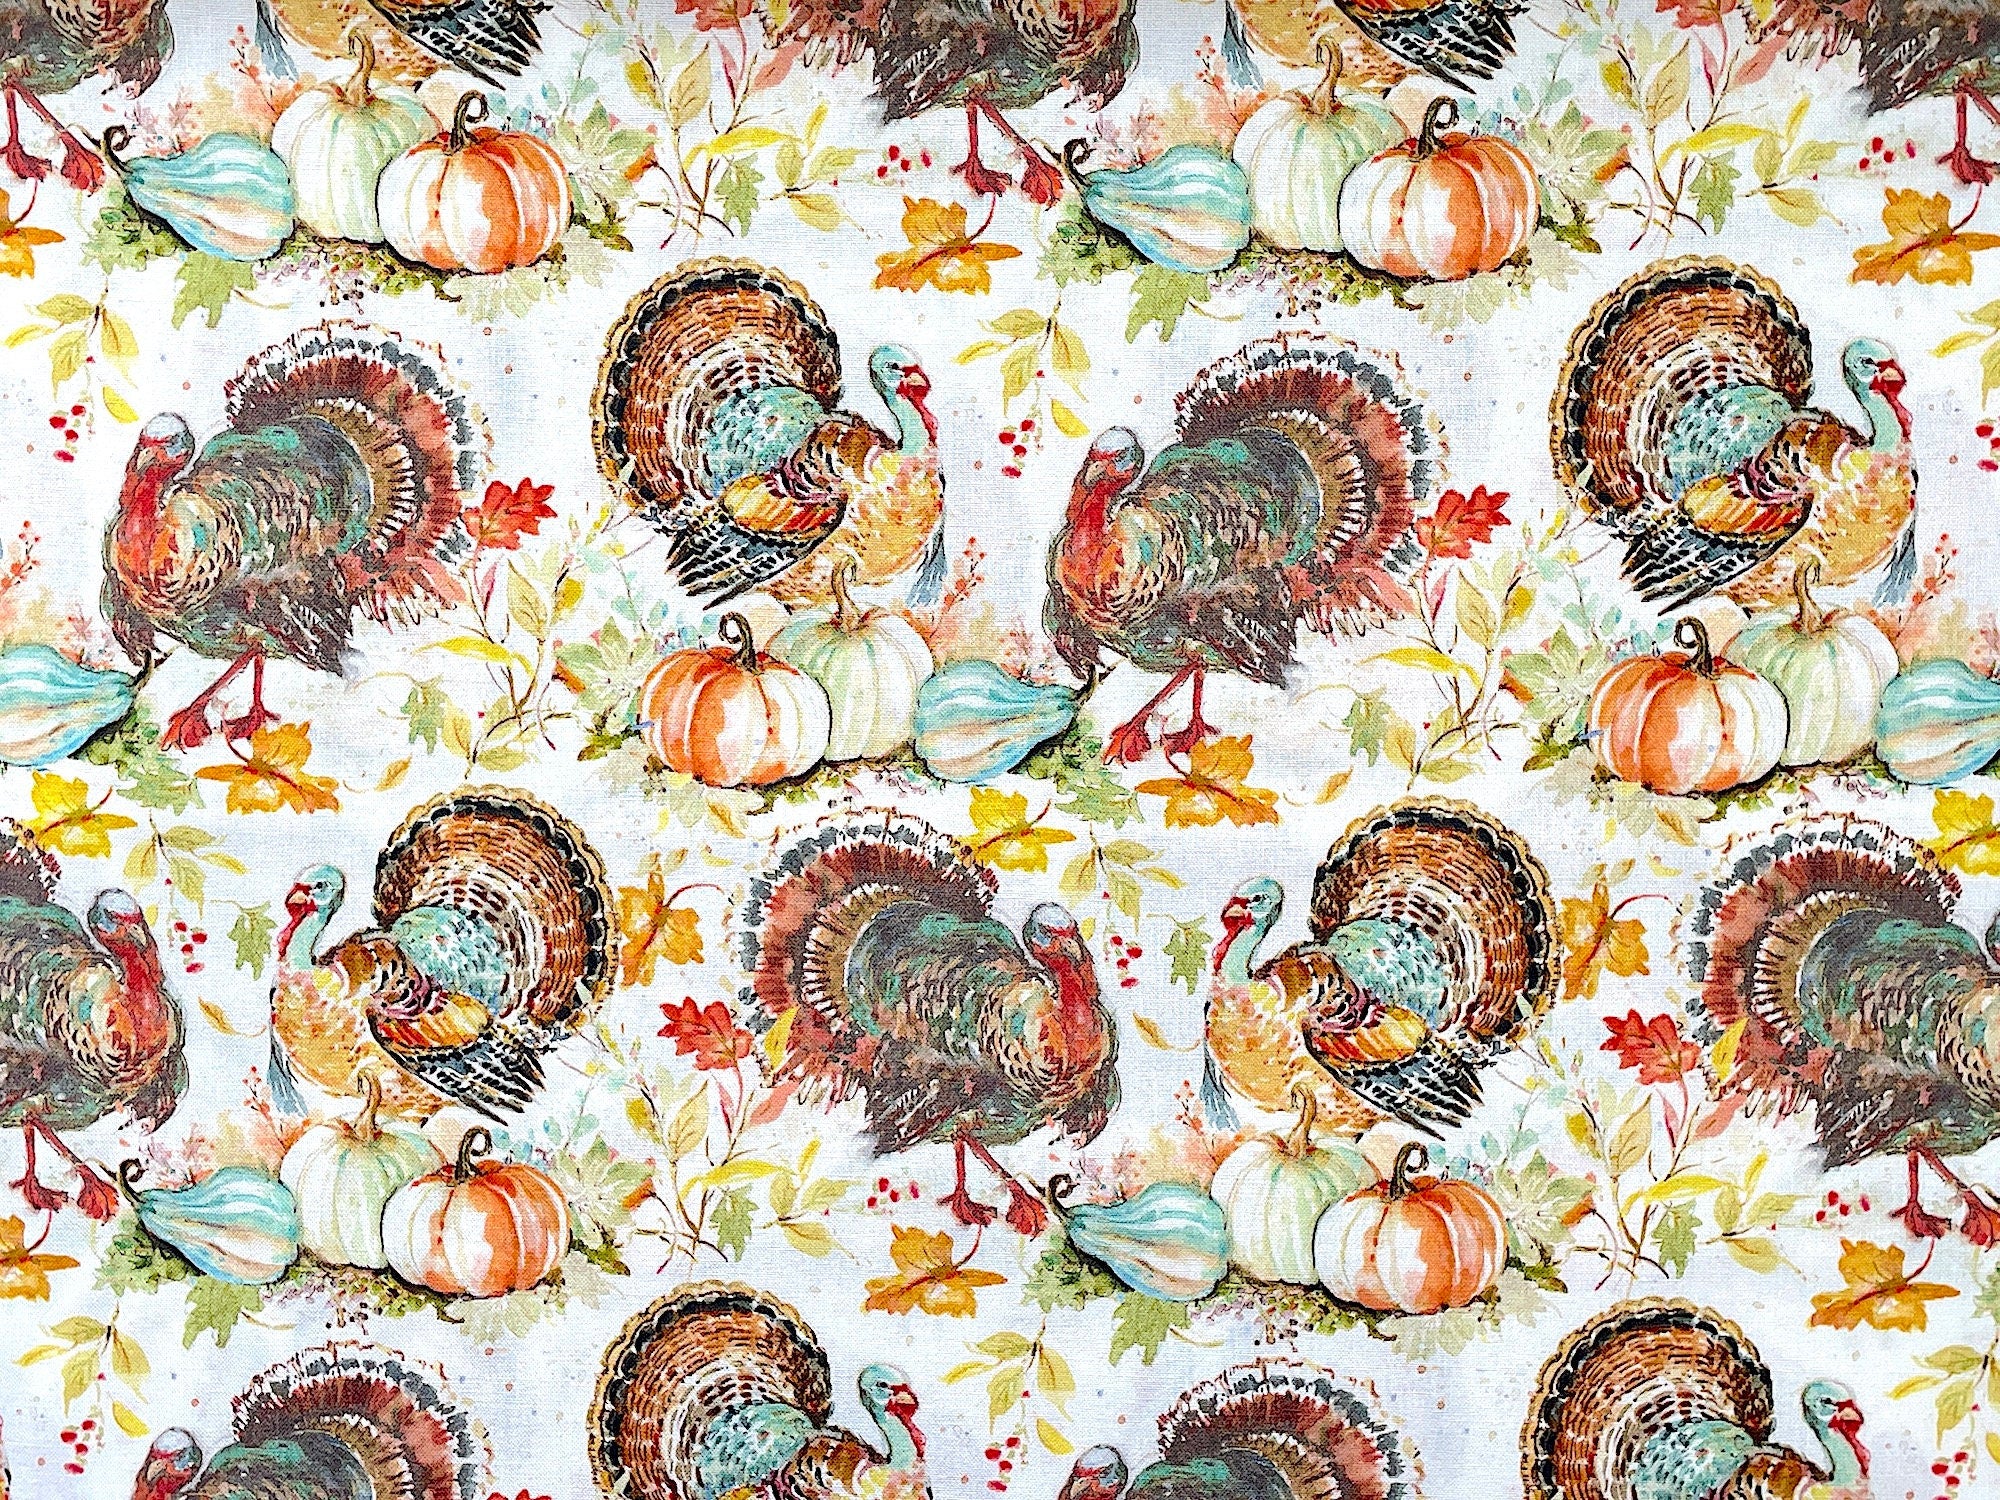 This white cotton fabric is covered with turkeys that are shades of brown, yellow, green and orange. You will find pumpkins and leaves on the ground around the turkeys.